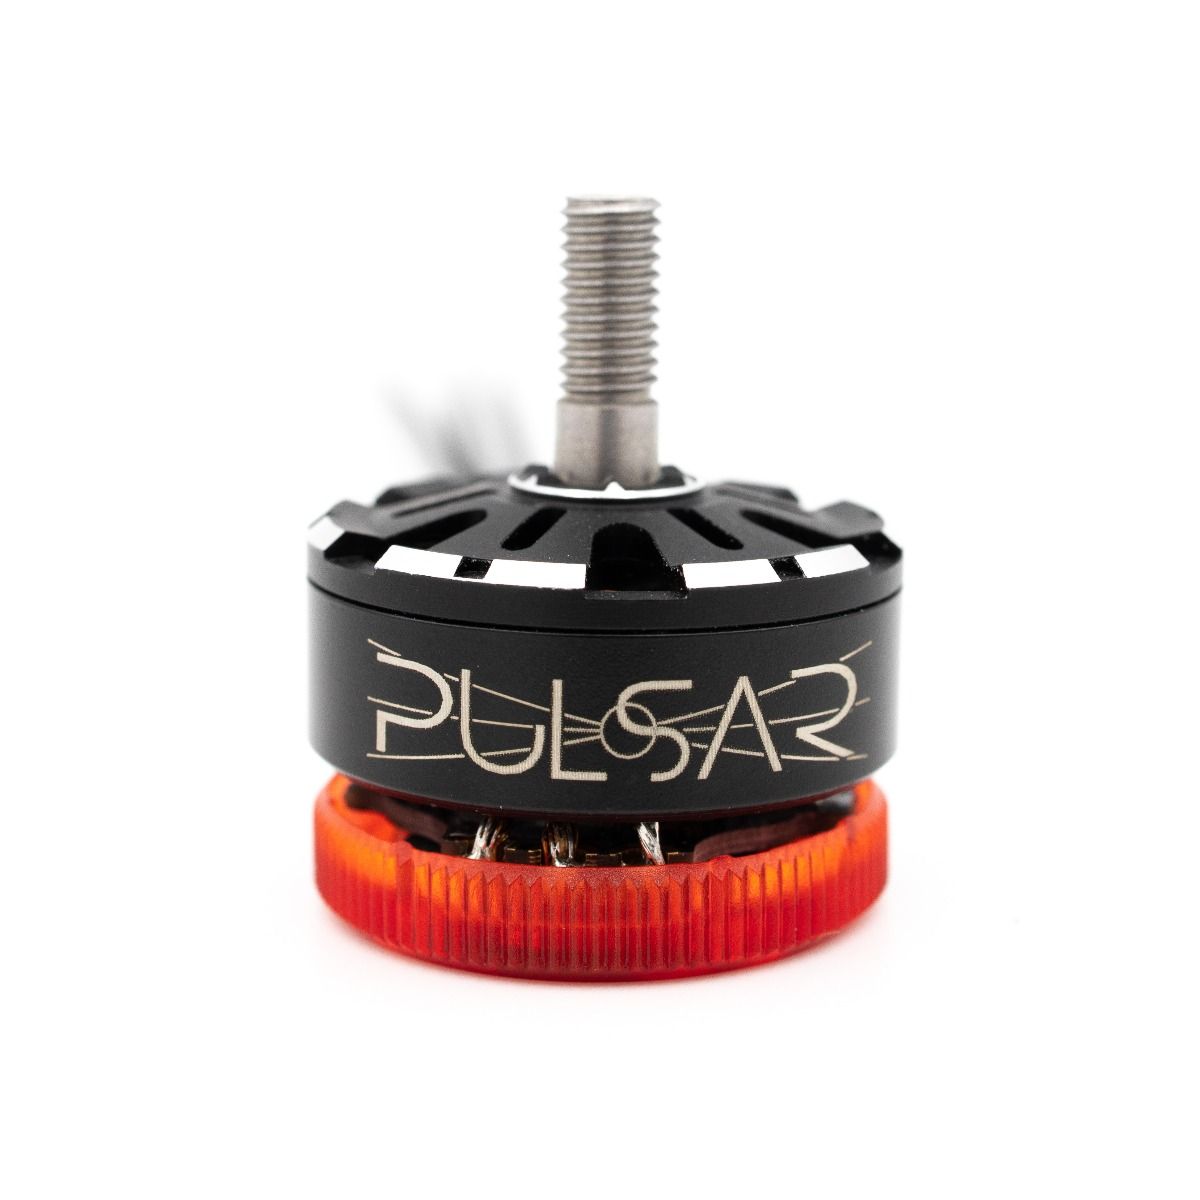 Brushless Motor EMAX Pulsar 2207 with LED 2450kv 3-6s for RC Drone